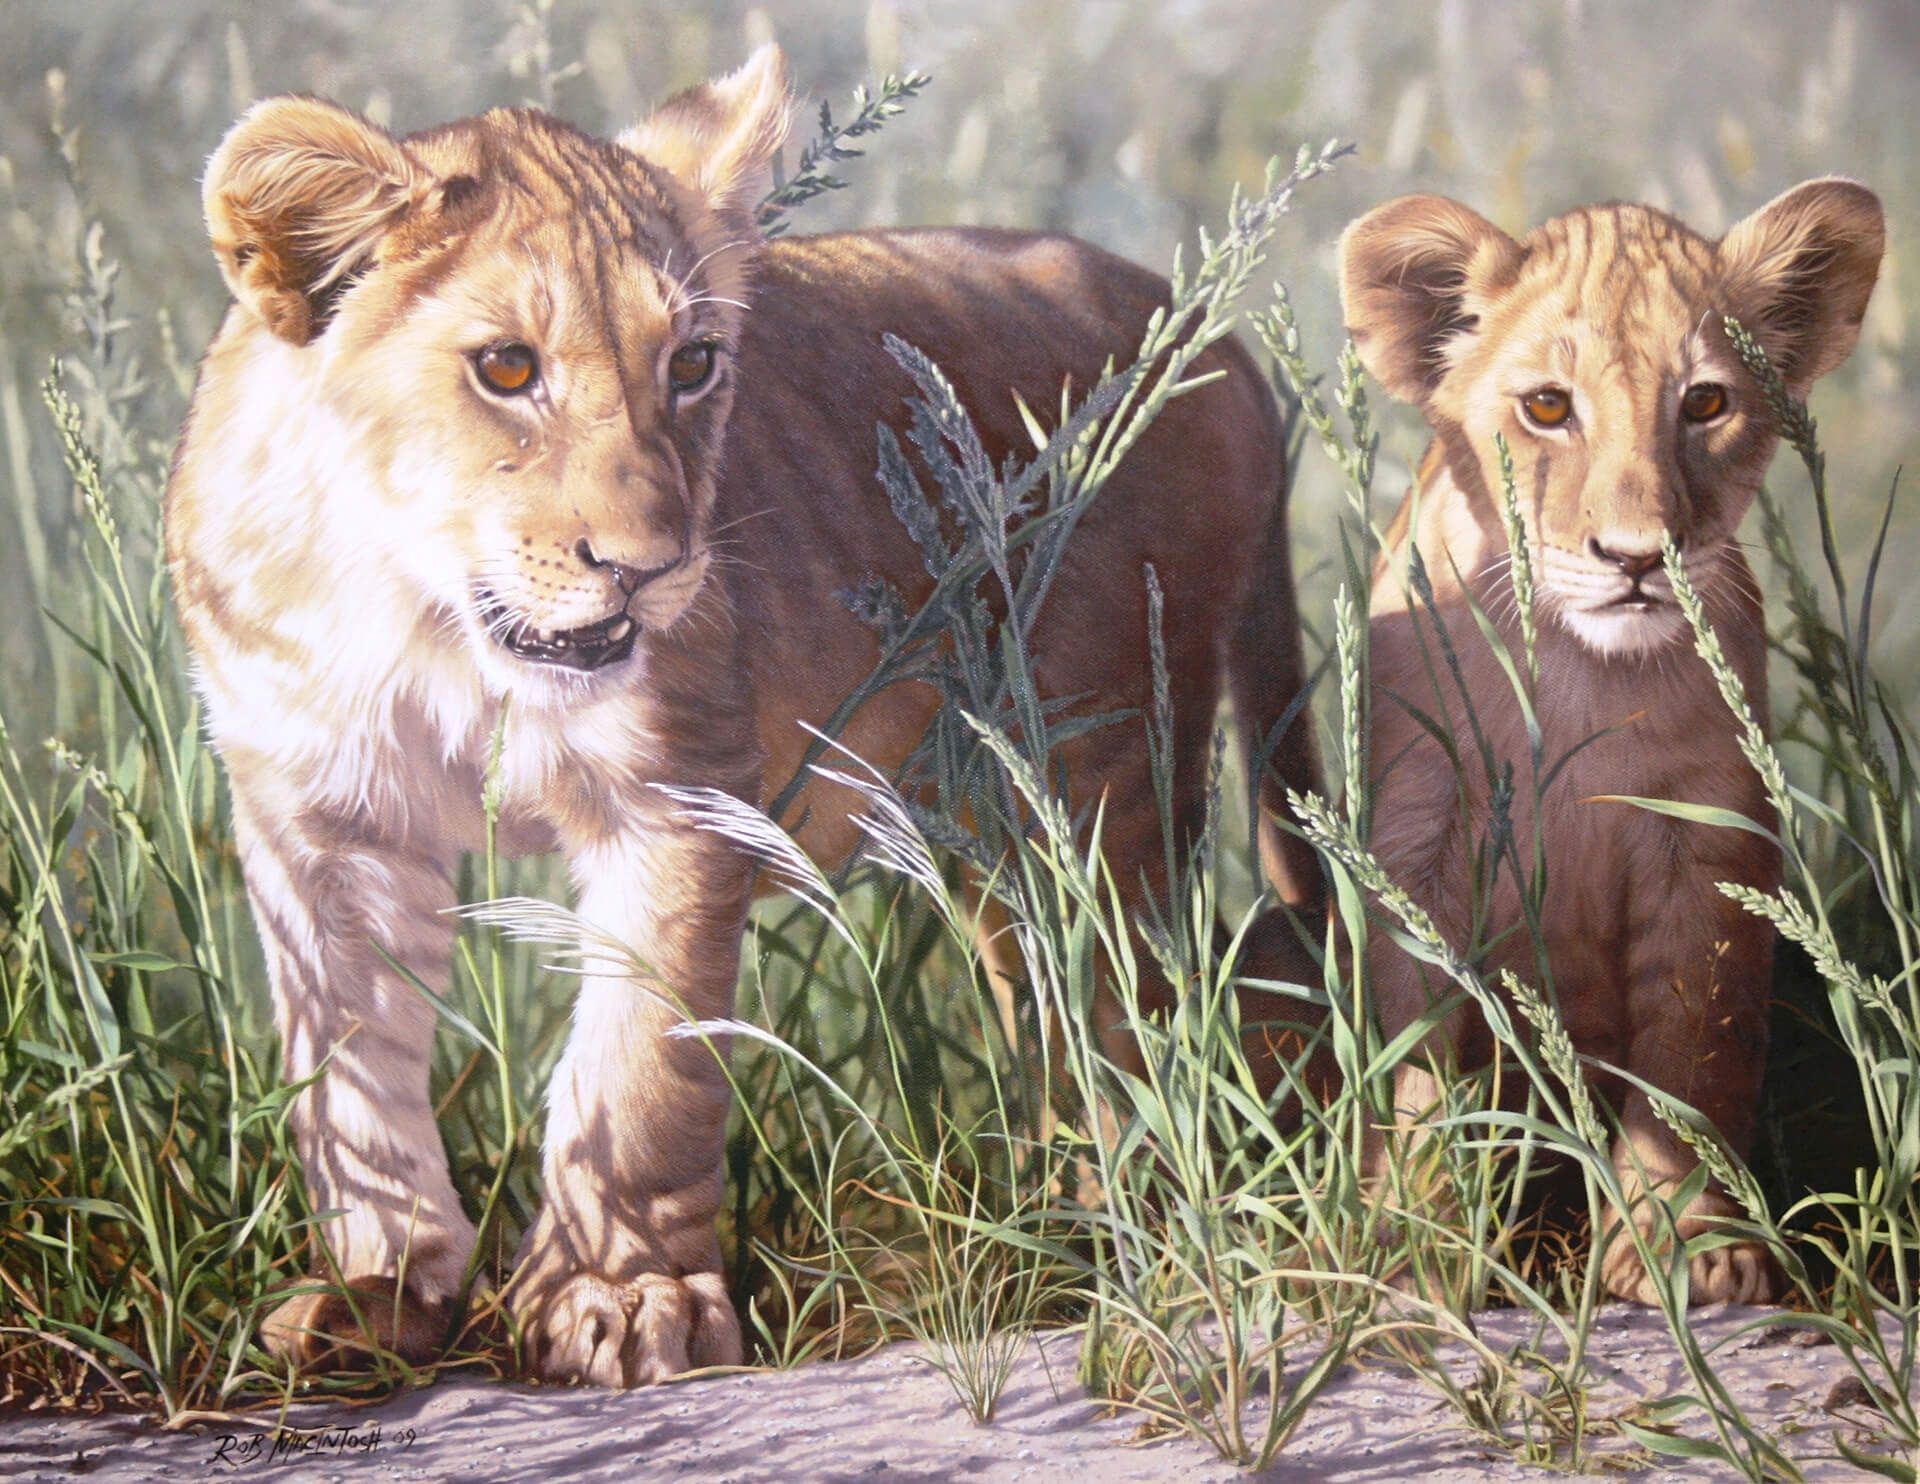 Photorealistic painting of two lion cubs